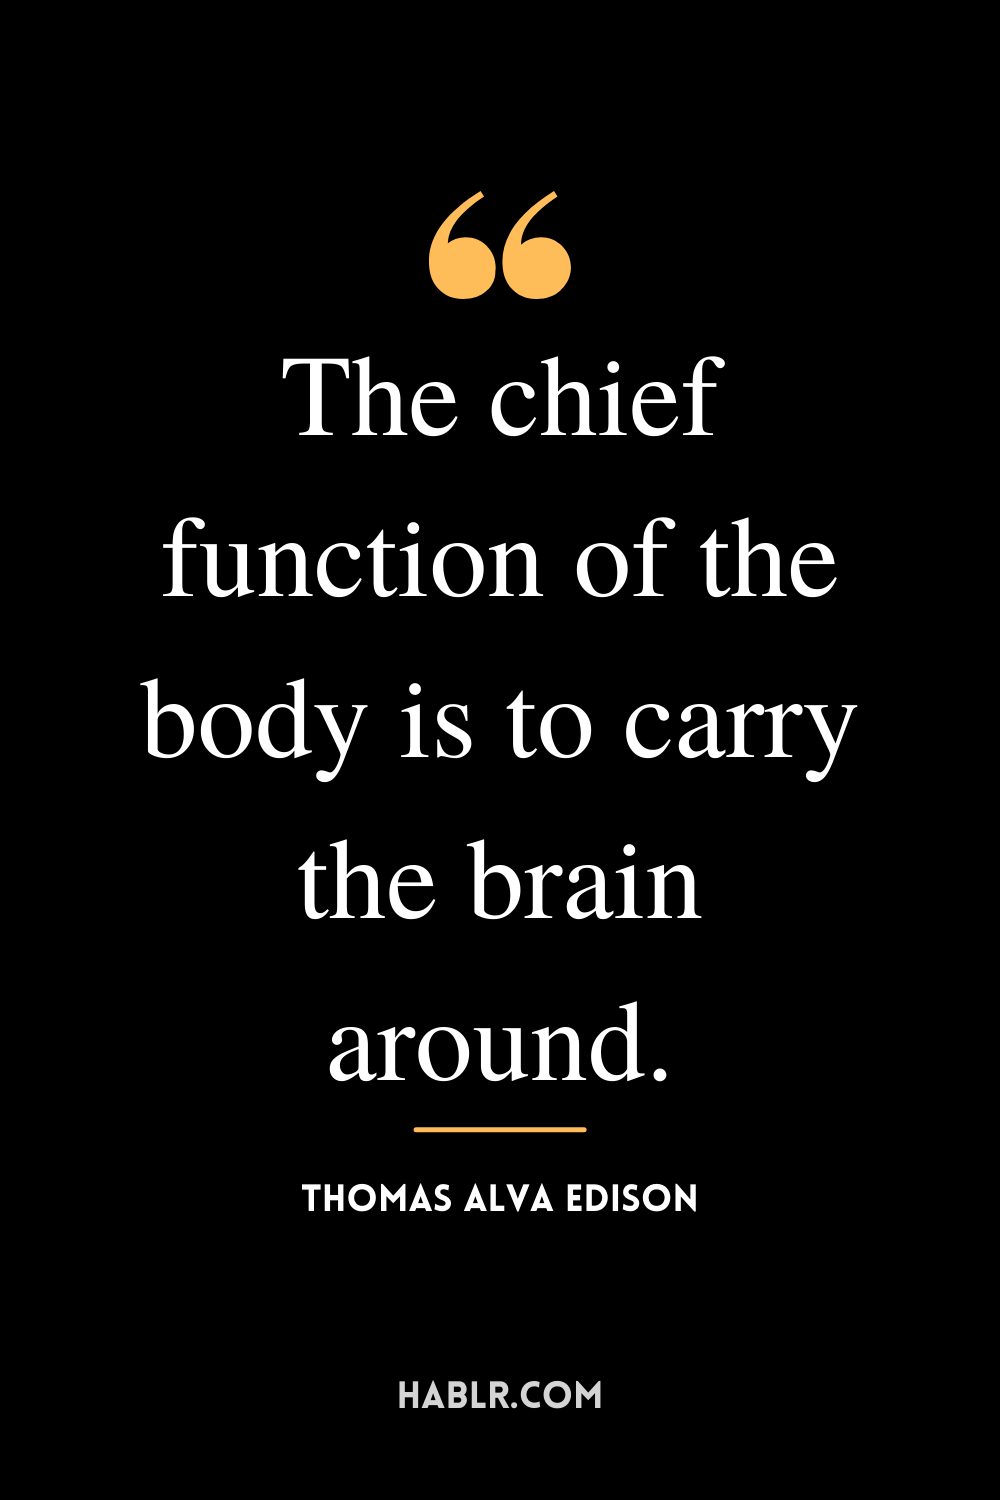 "The chief function of the body is to carry the brain around." -Thomas Alva Edison